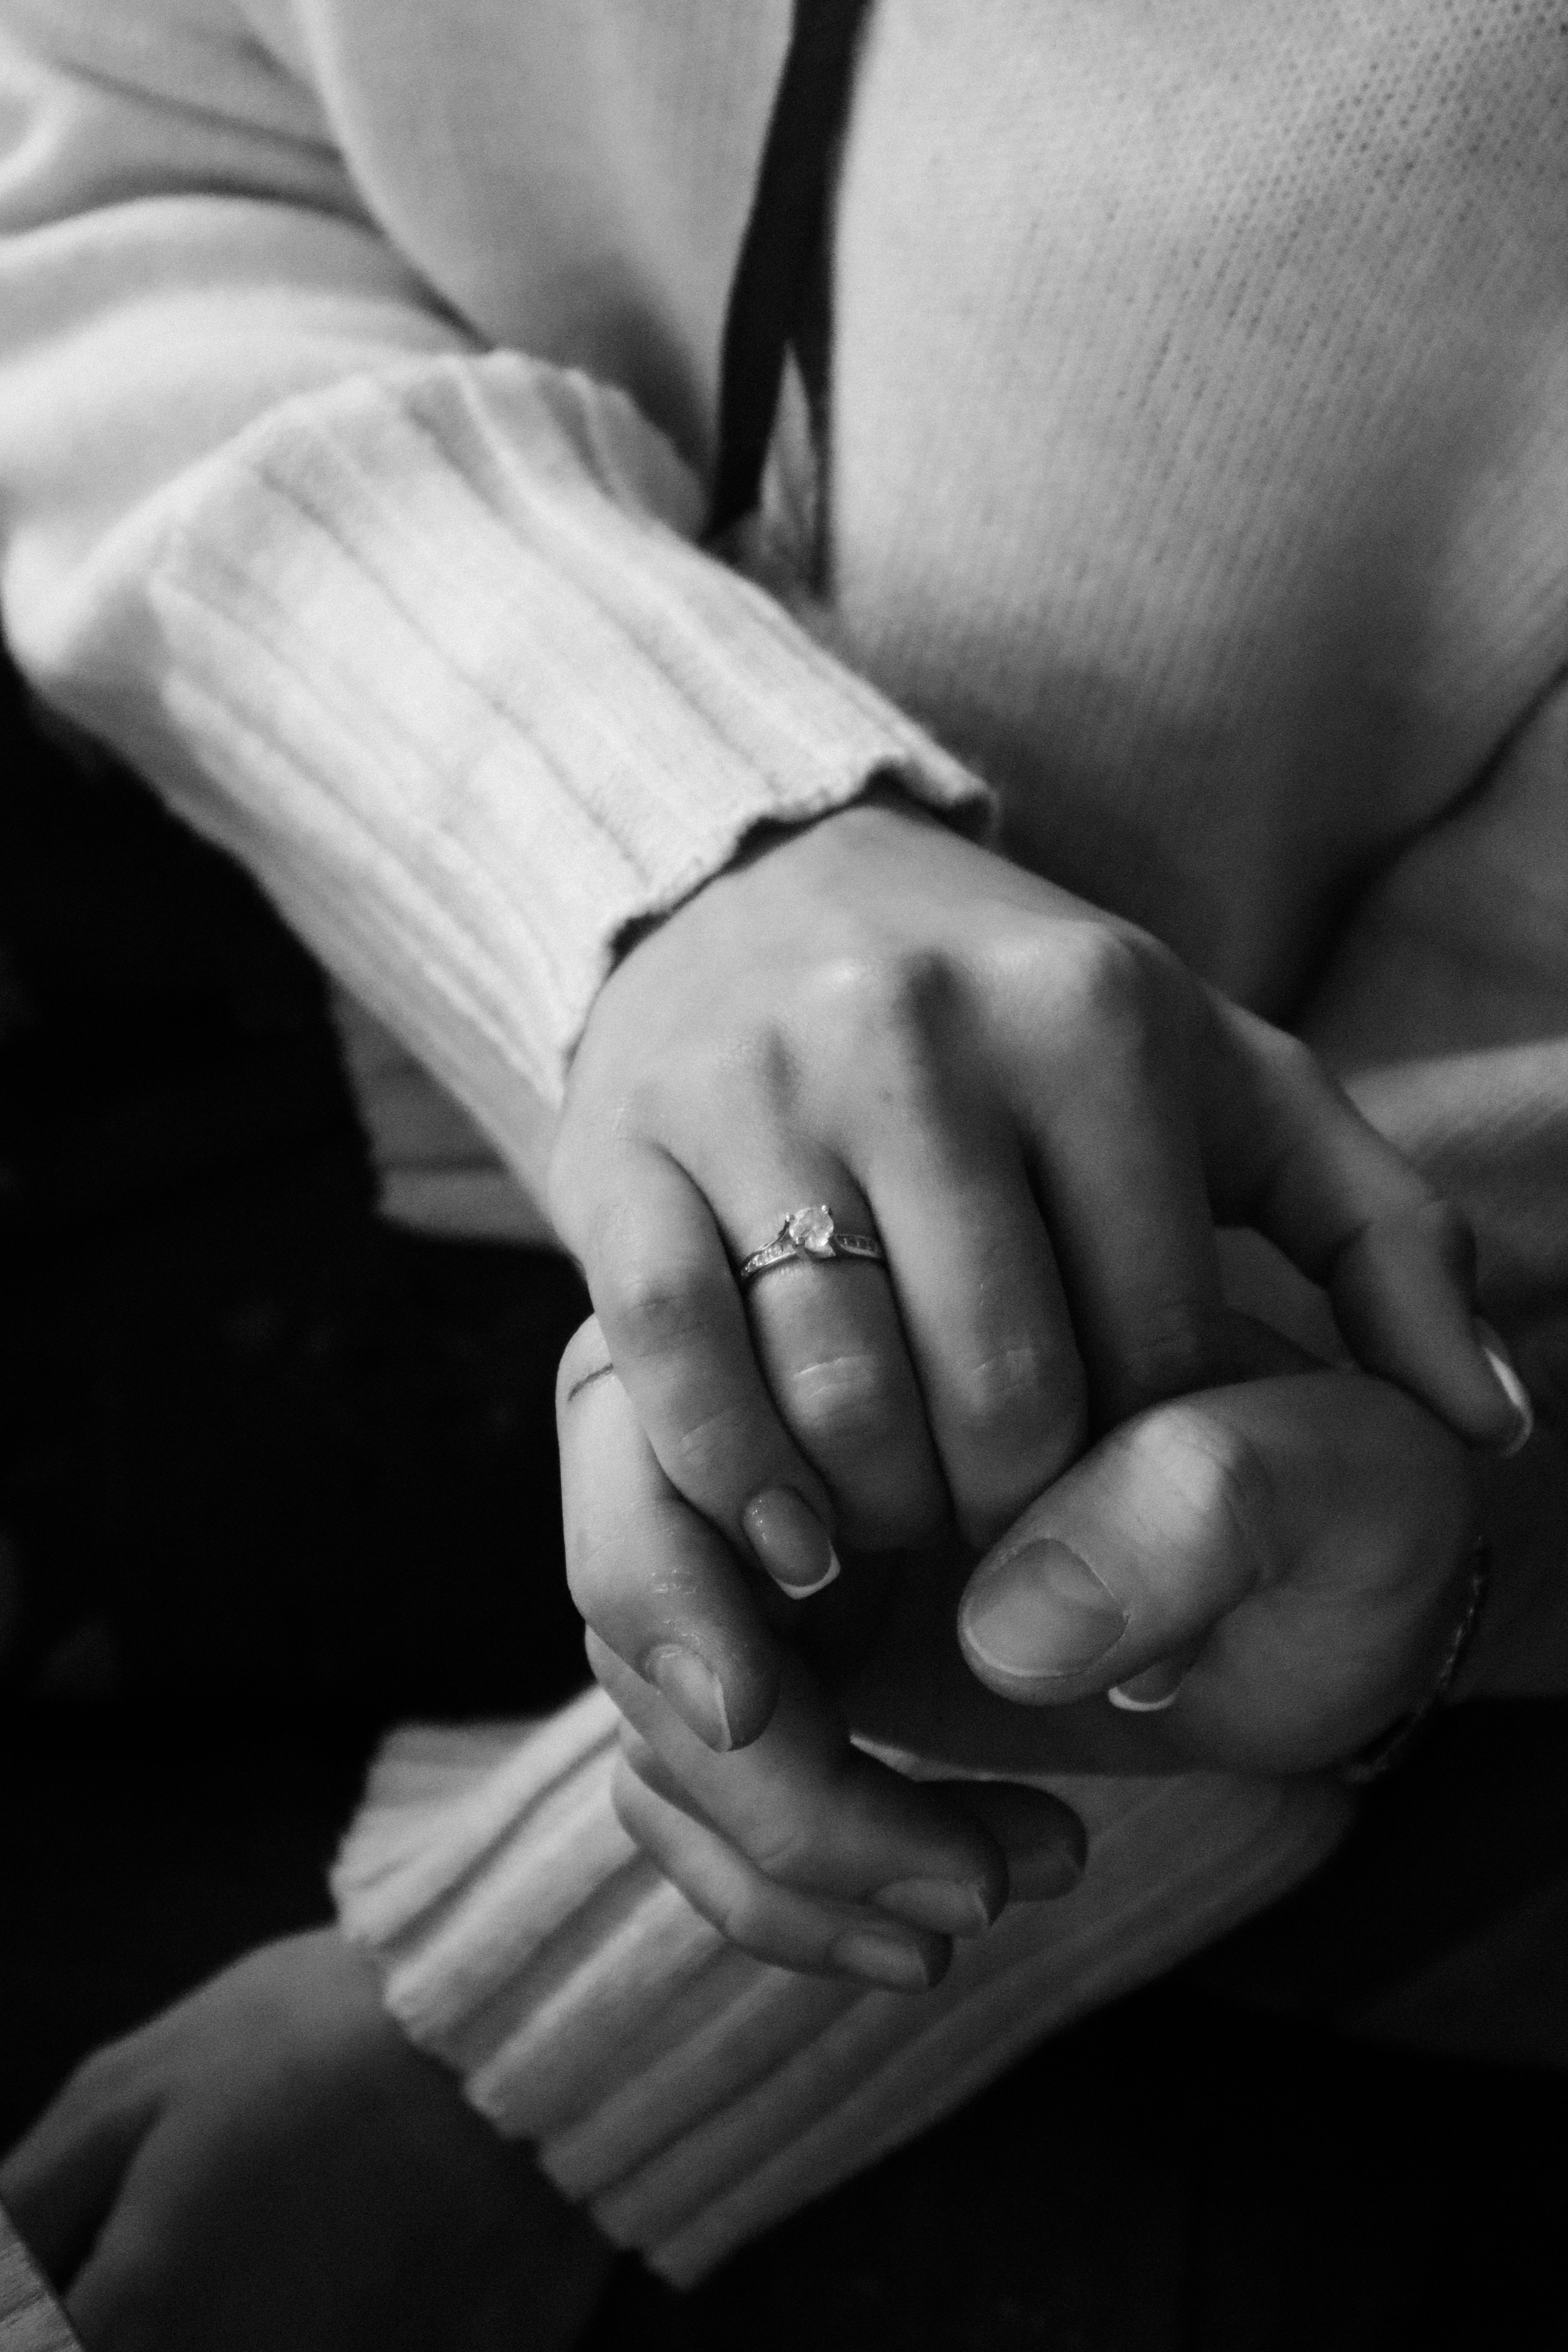 touching, hands, love, bw, chb, touch